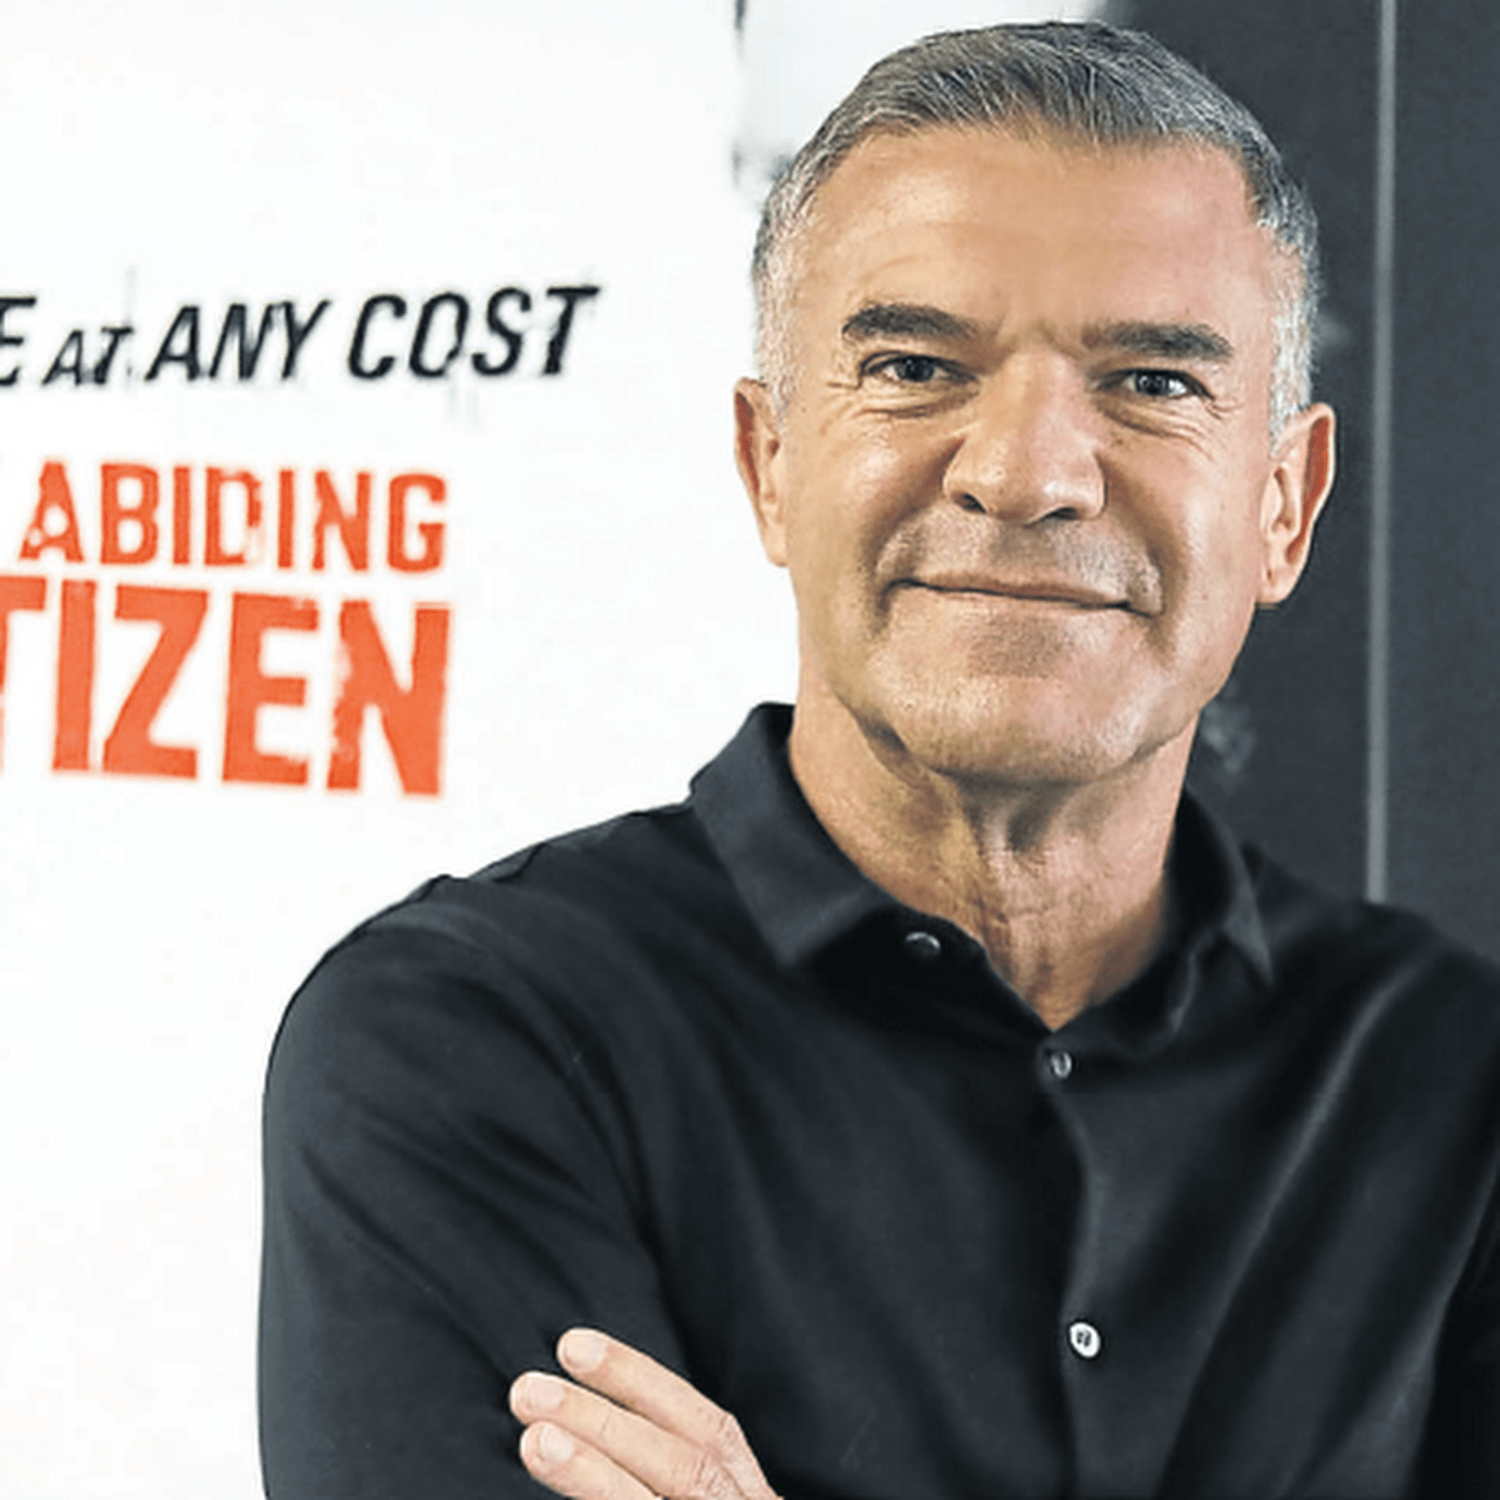 Adriano Mazzotti Biography: Age, Wife, Net Worth, Children, Companies, House, Nationality, Cars, Family